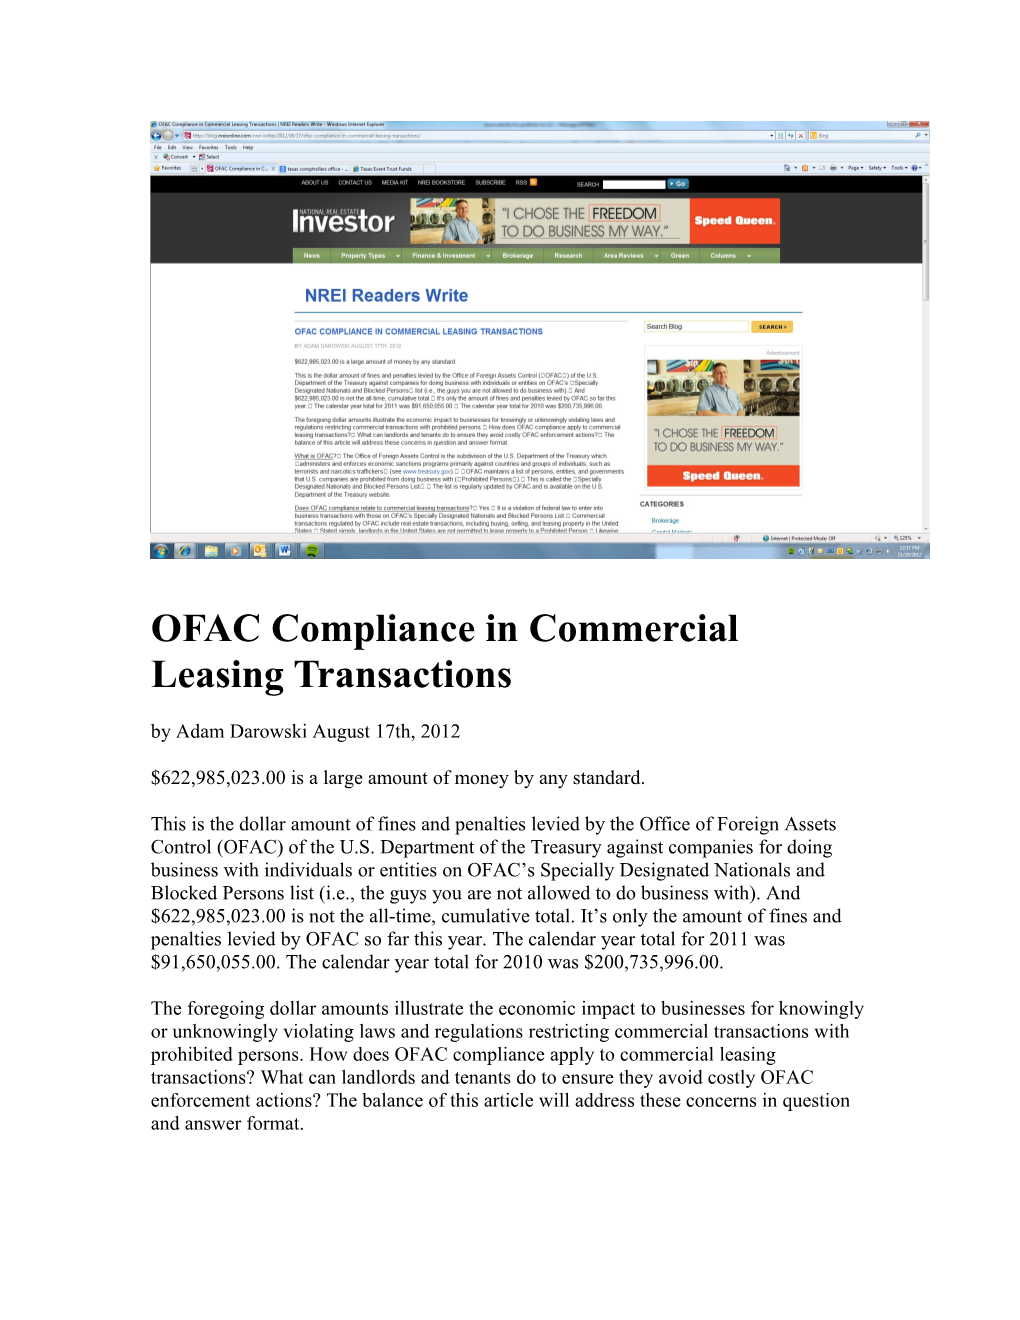 OFAC Compliance in Commercial Leasing Transactions